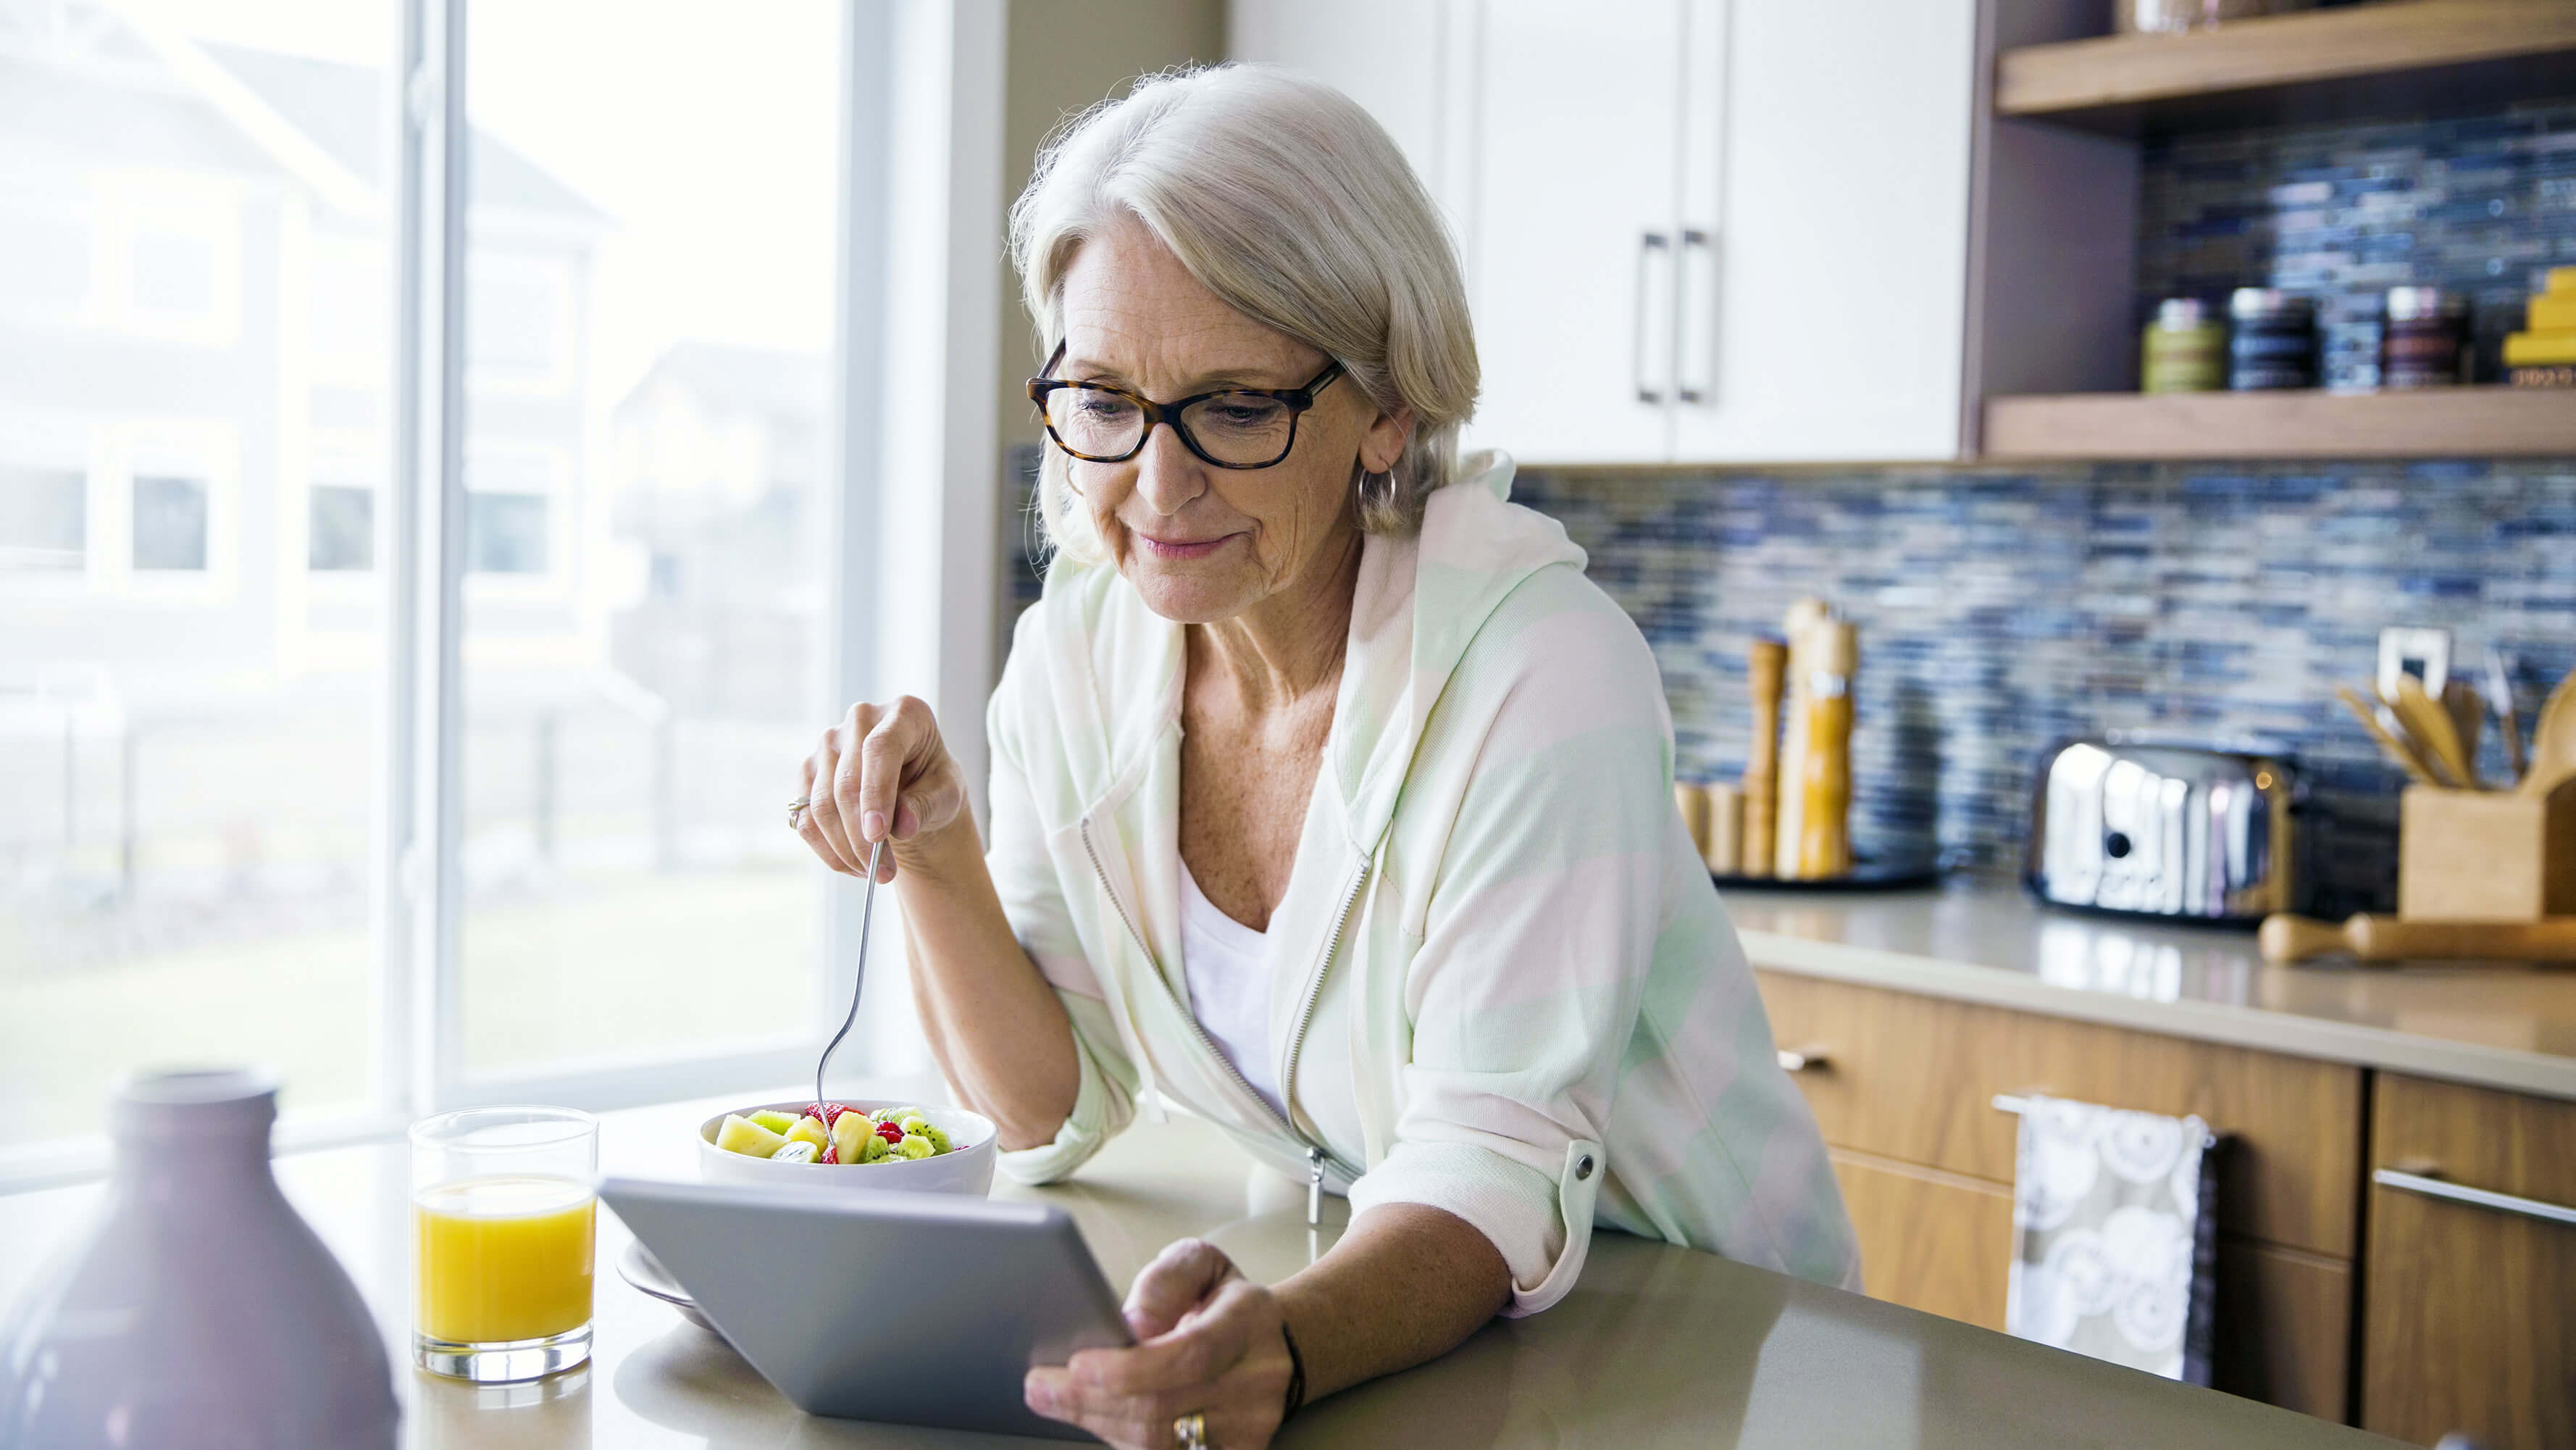 An older female with silvery, long hair eats a bowl of fruit in her kitchen while using a tablet computer to access digital health services.